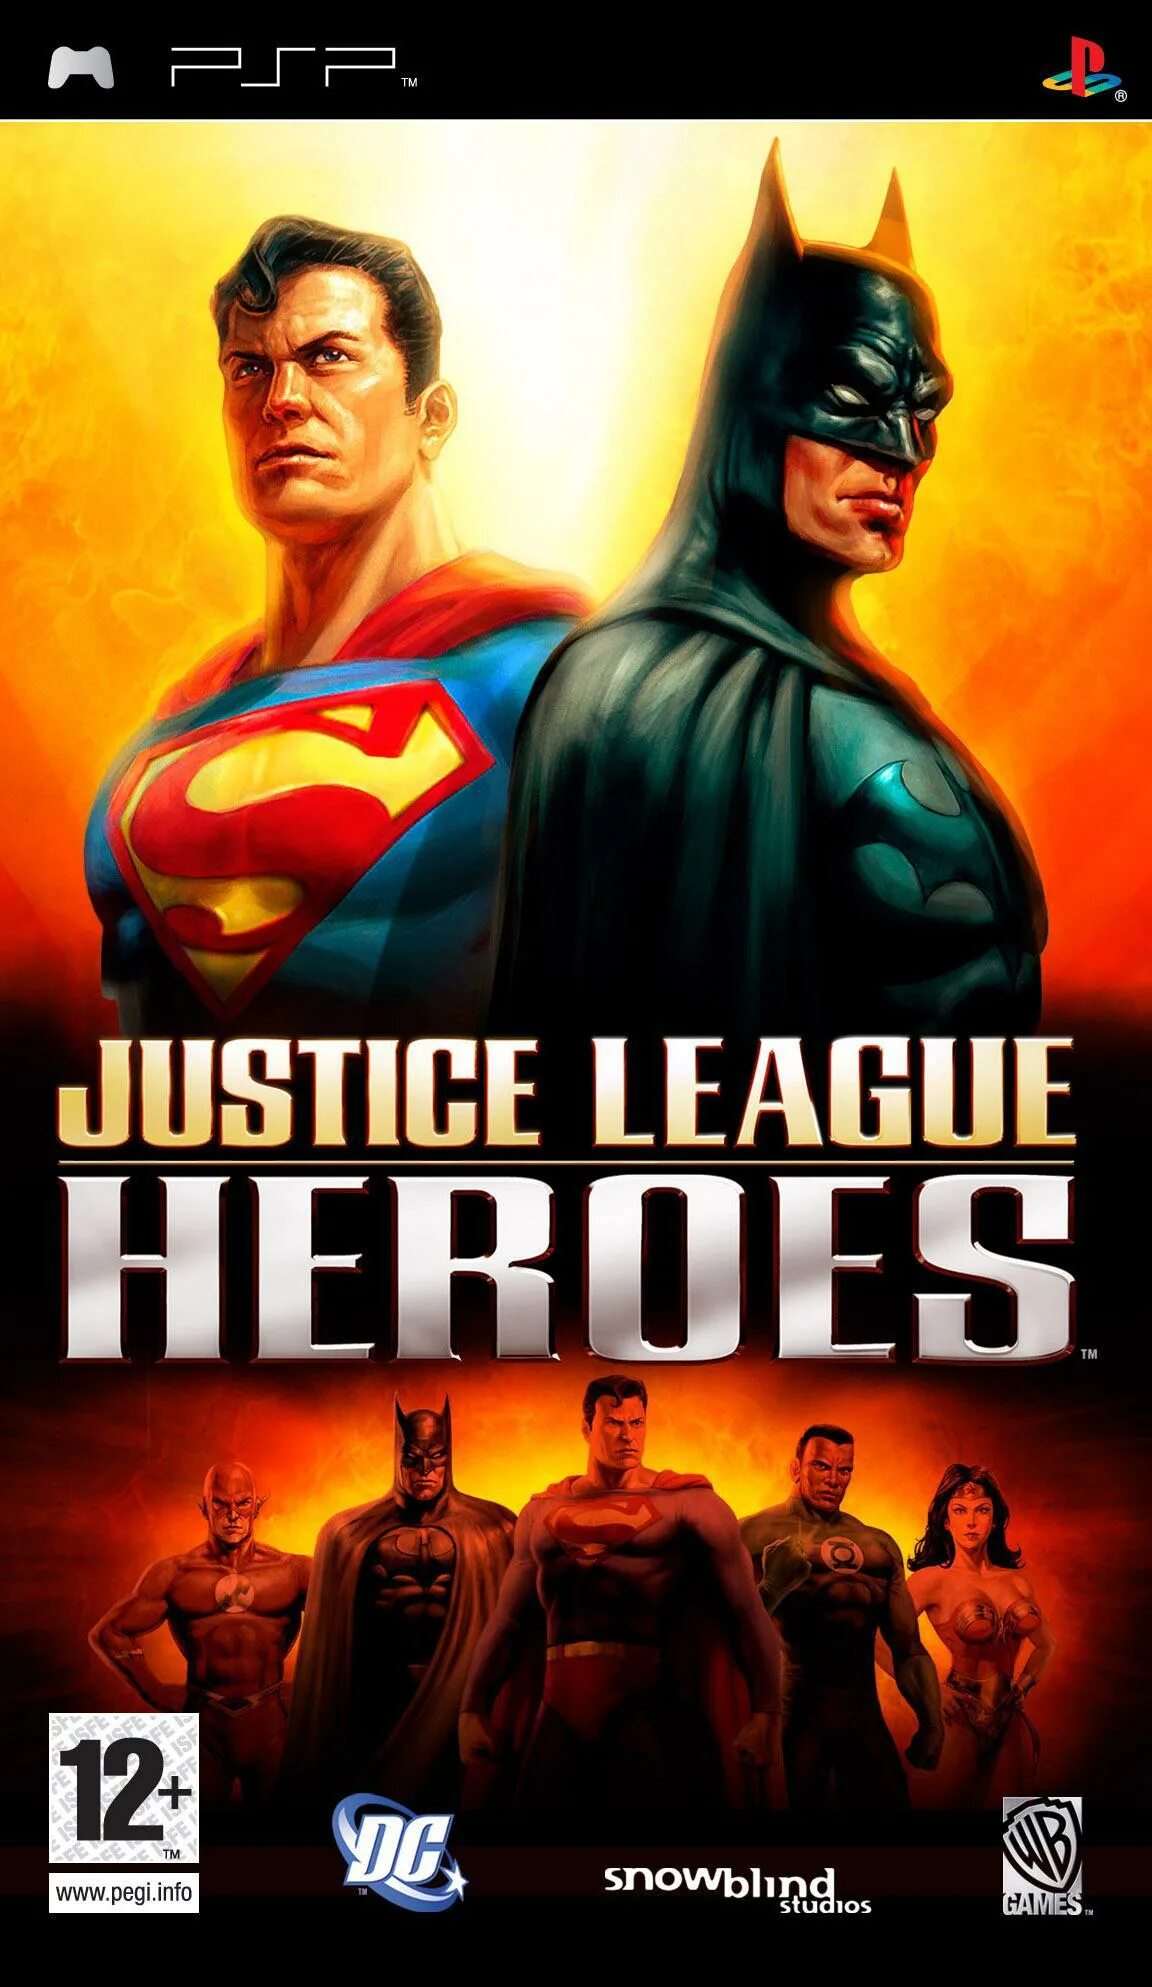 Justice League Heroes ПСП. Justice League Heroes игра. Justice League Heroes 2006. Игры PSP Justice League Heroes. Justice game